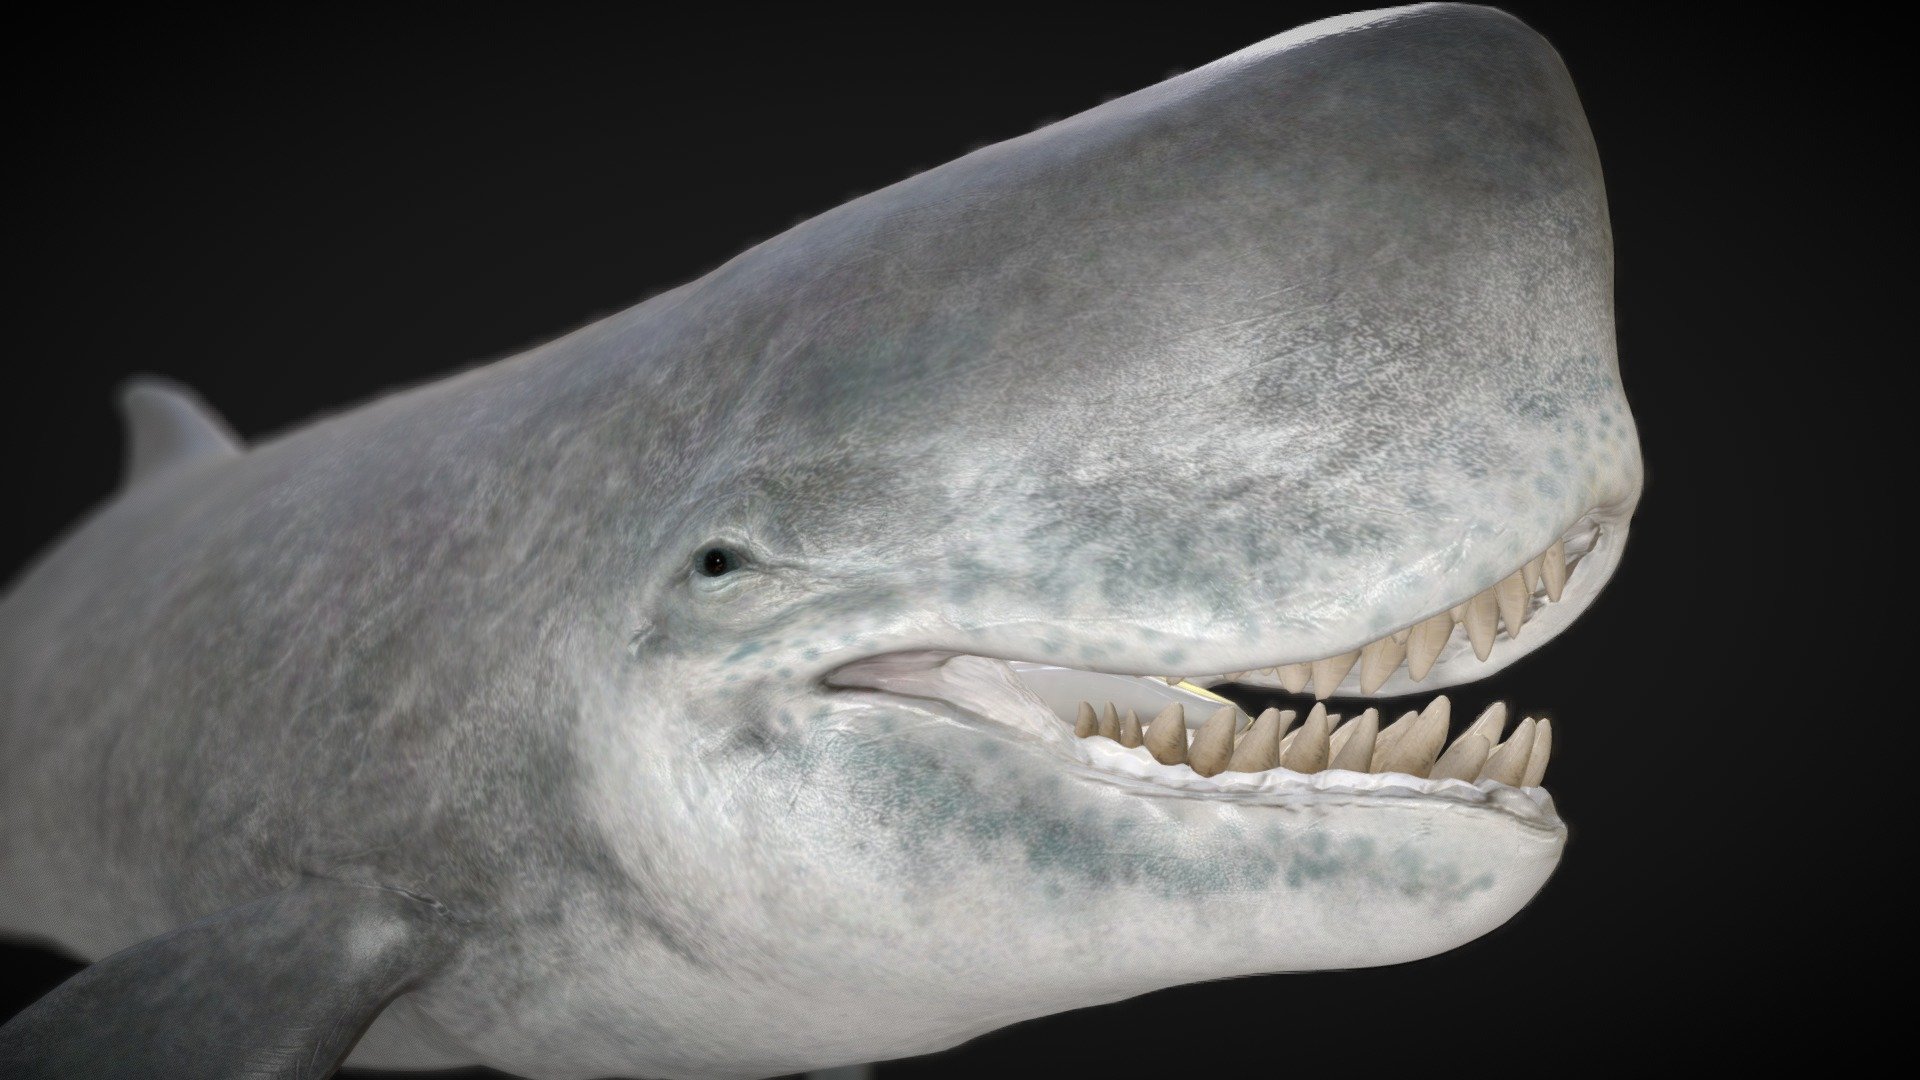 Livyatan, an awe-inspiring apex predator of the Miocene seas, surfaces as a colossal marine mammal with a formidable set of teeth. Named after the biblical sea monster Leviathan, this prehistoric whale captured the essence of marine dominance during its time.

With massive jaws and teeth that rivaled those of the modern sperm whale, Livyatan was a fearsome carnivore, likely preying on large marine animals in the ancient oceans. Its evolutionary adaptations make it a fascinating subject for paleontologists seeking to understand the complexities of prehistoric marine ecosystems 3d model